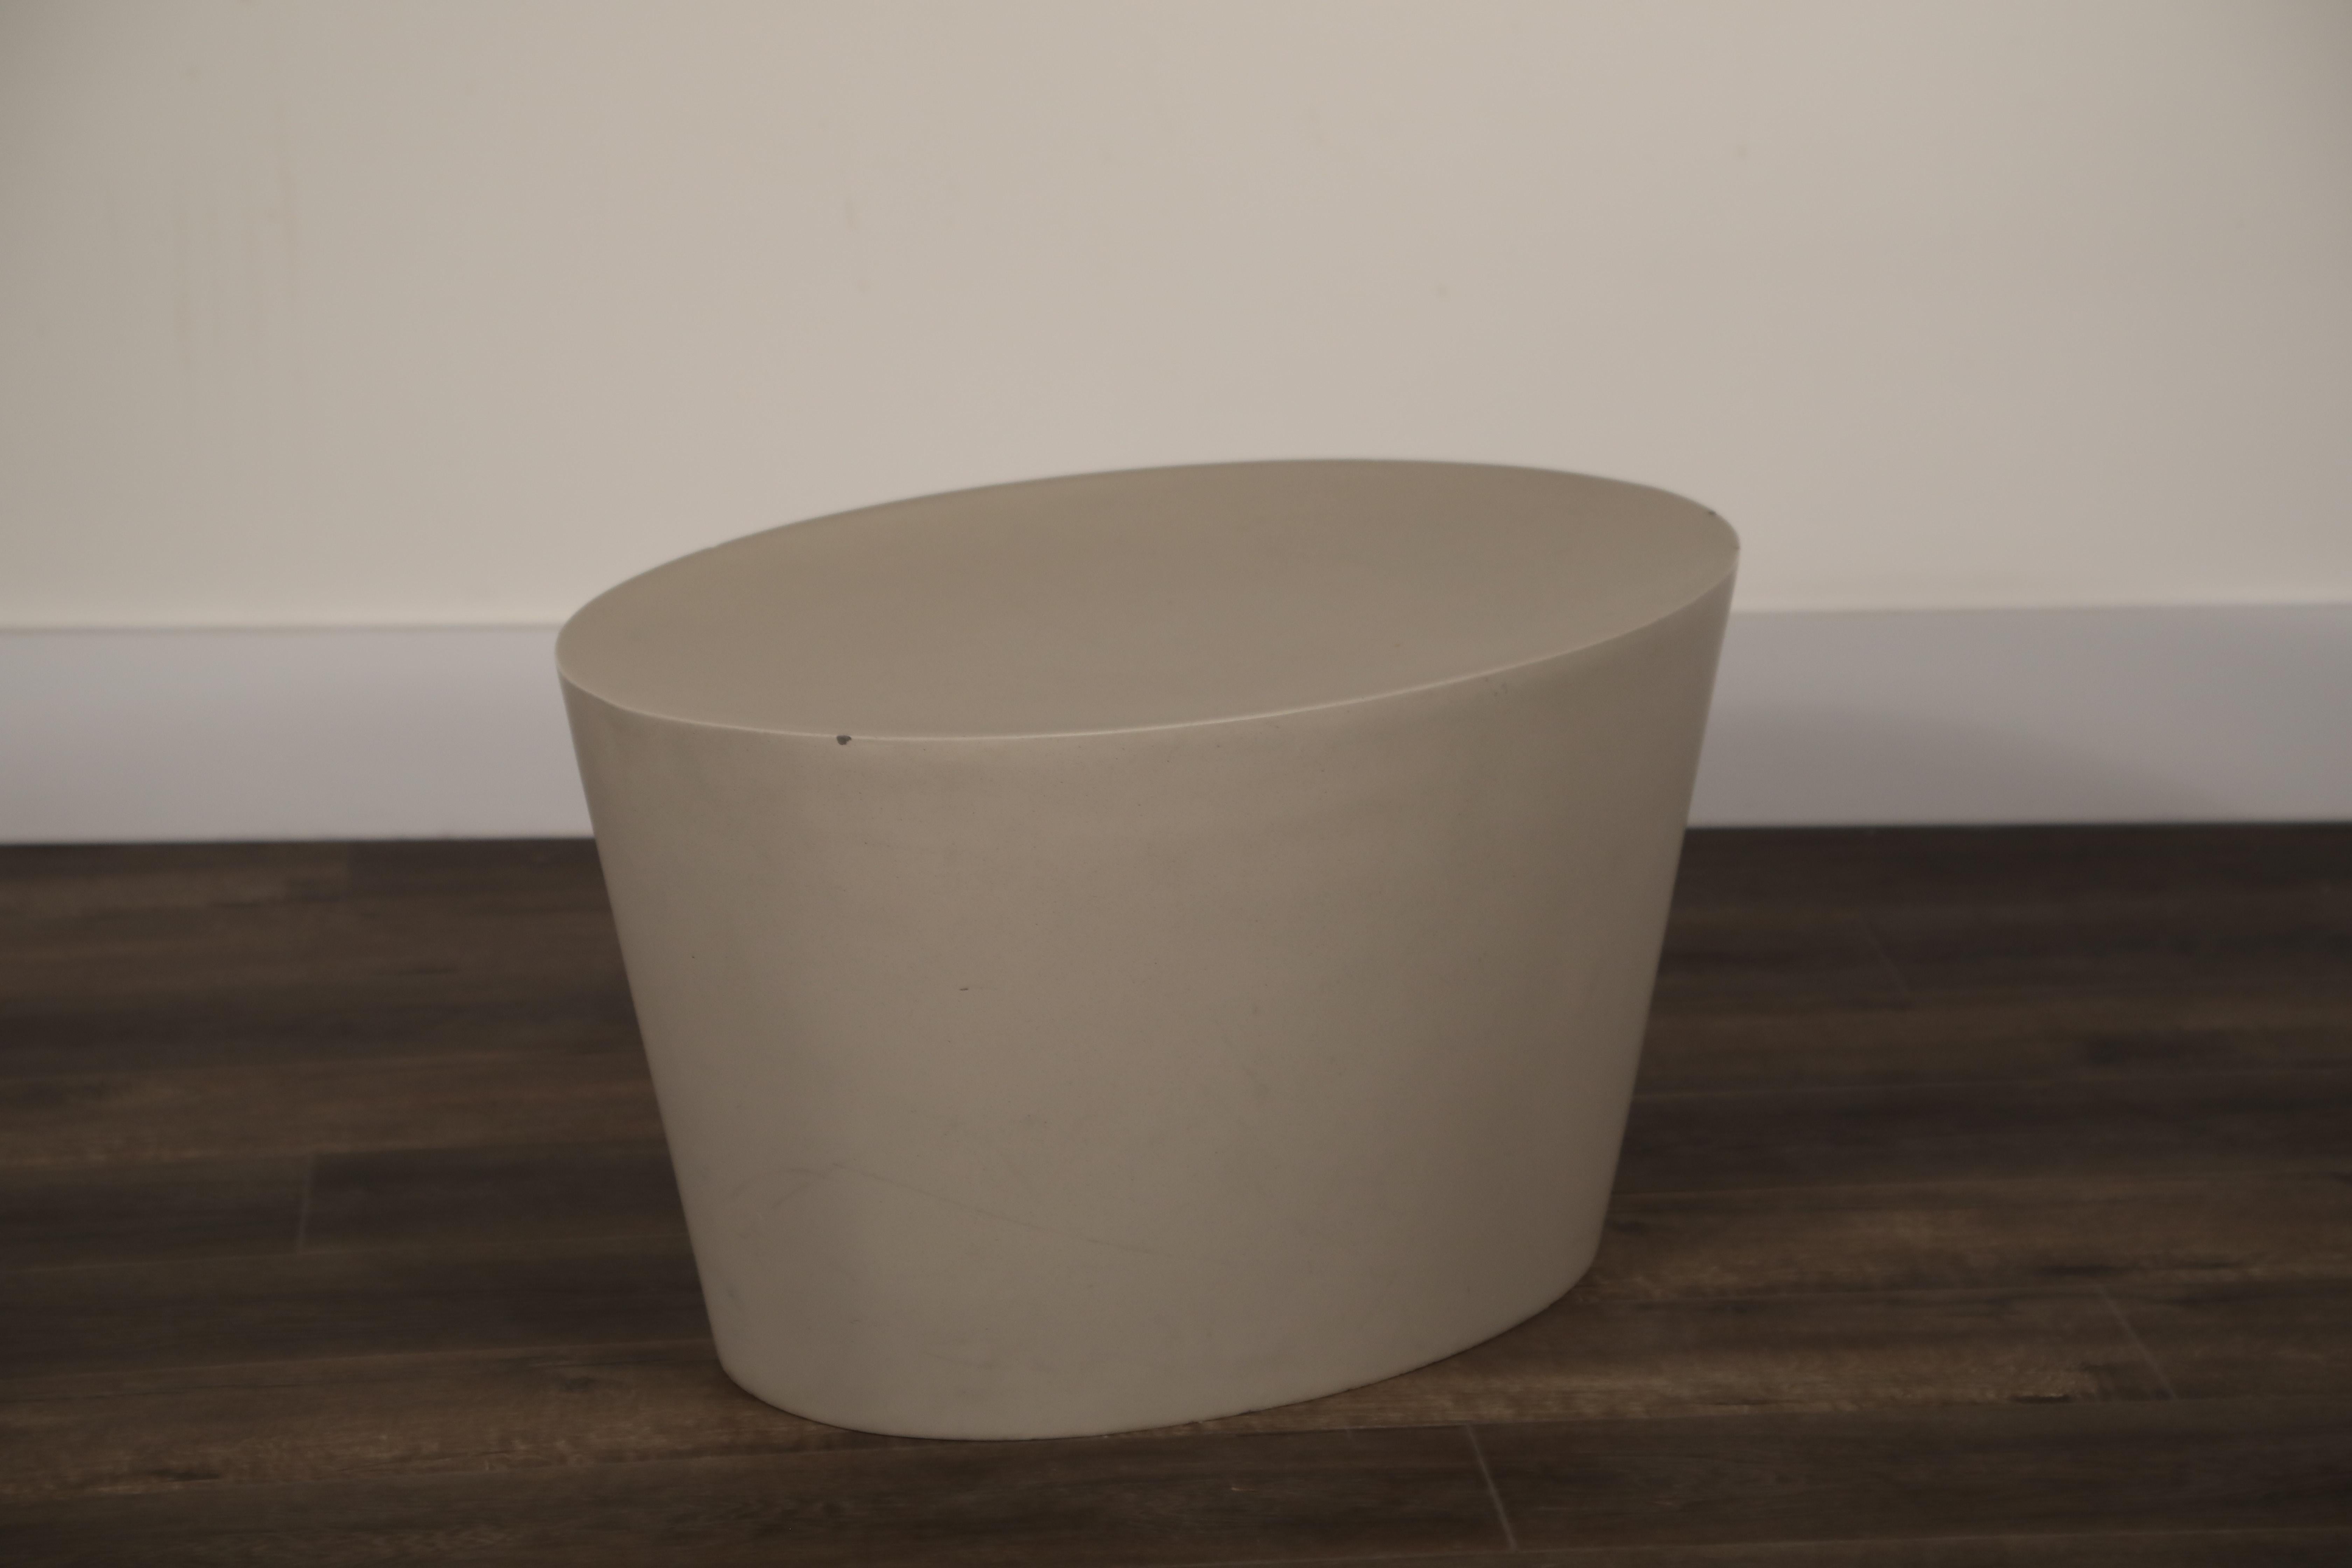 Maya Lin 1st-Generation Concrete Stool for Knoll Studio, Signed and Stamped 1998 10